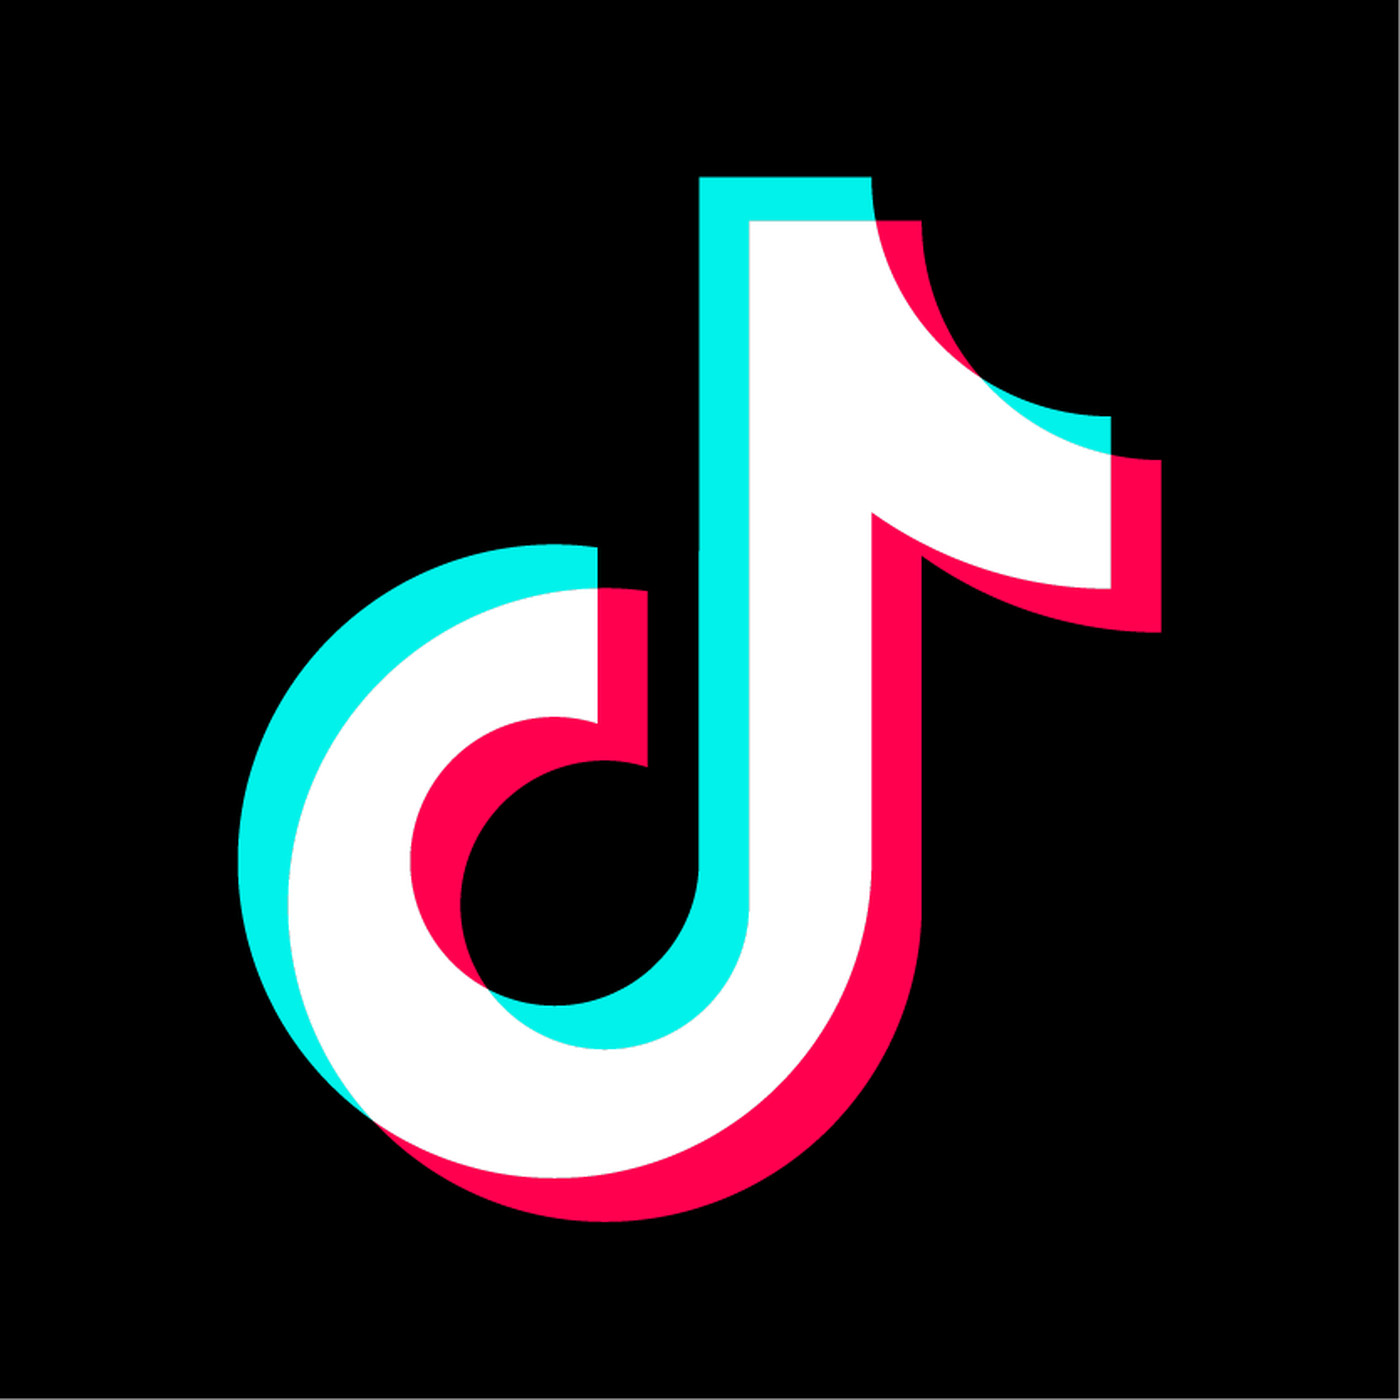 Internet Culture: Racism Is The New “Trend” on TikTok